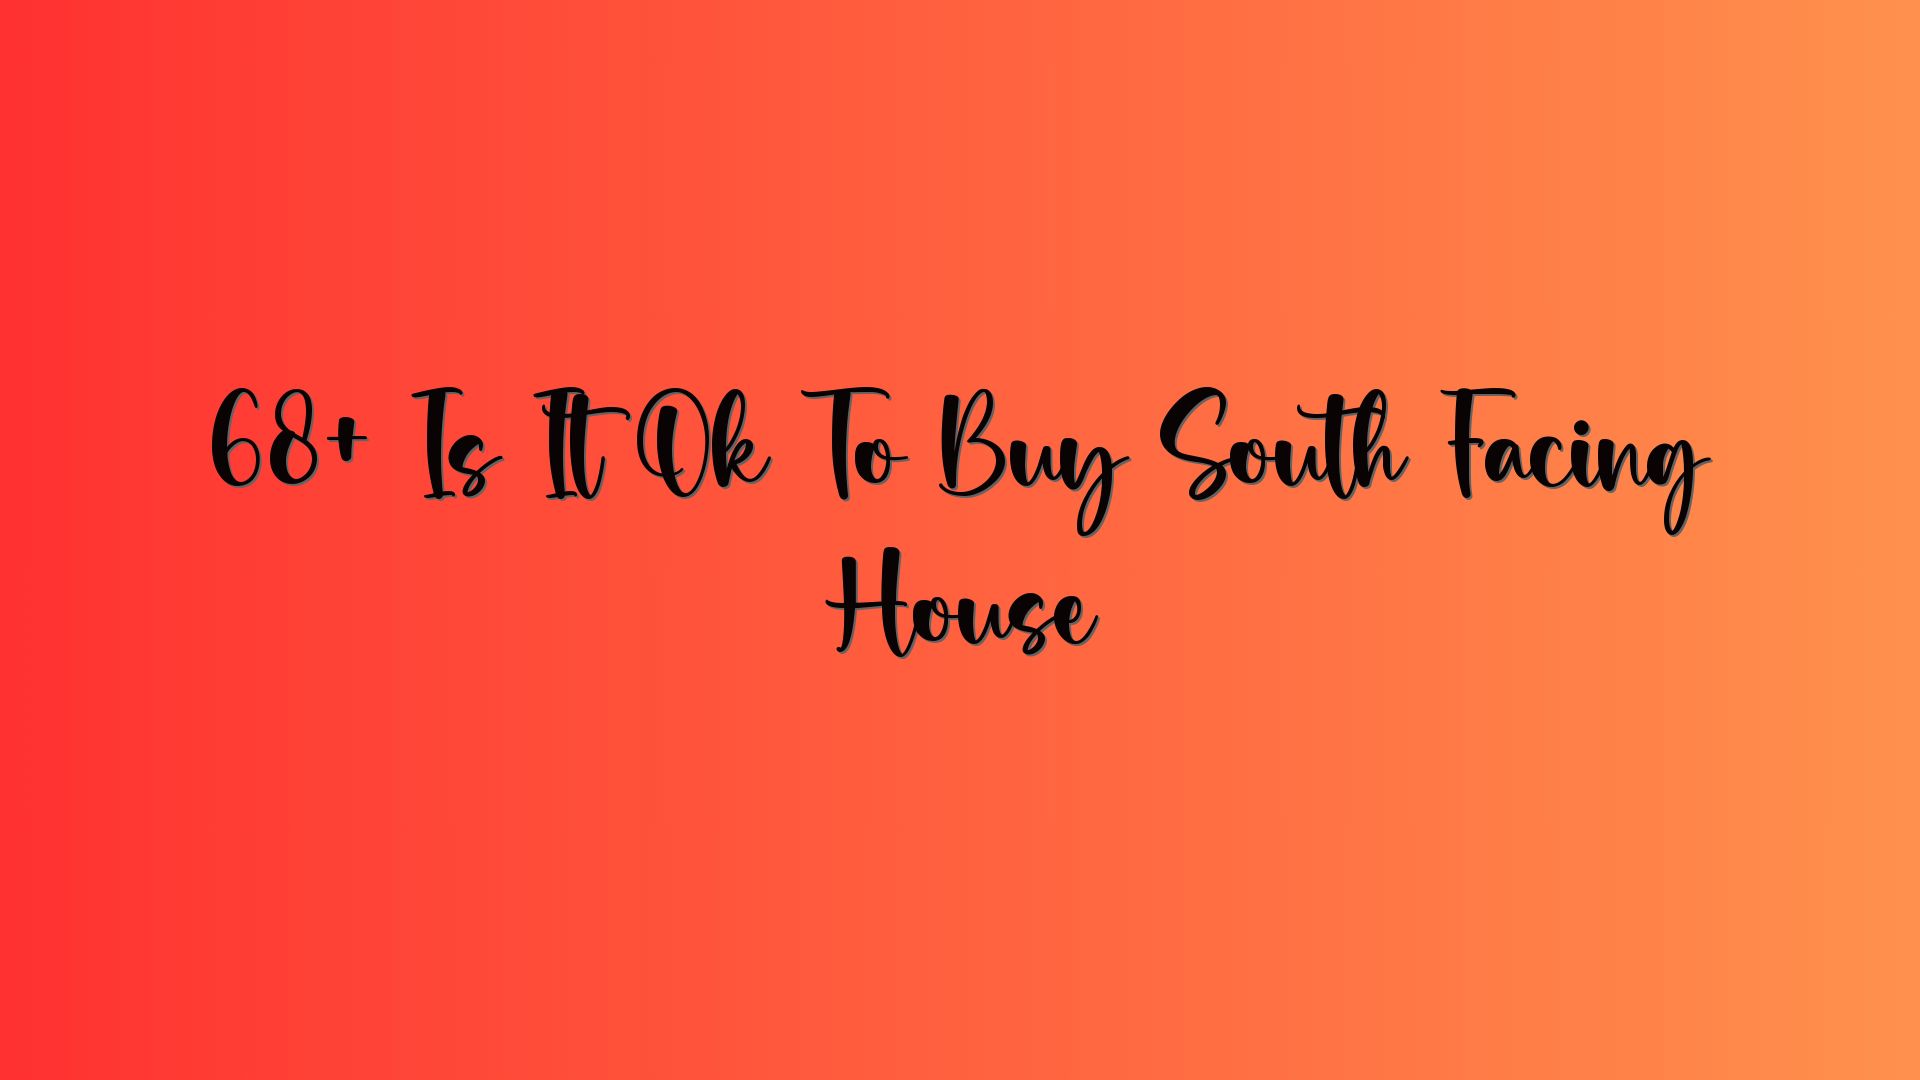 68+ Is It Ok To Buy South Facing House